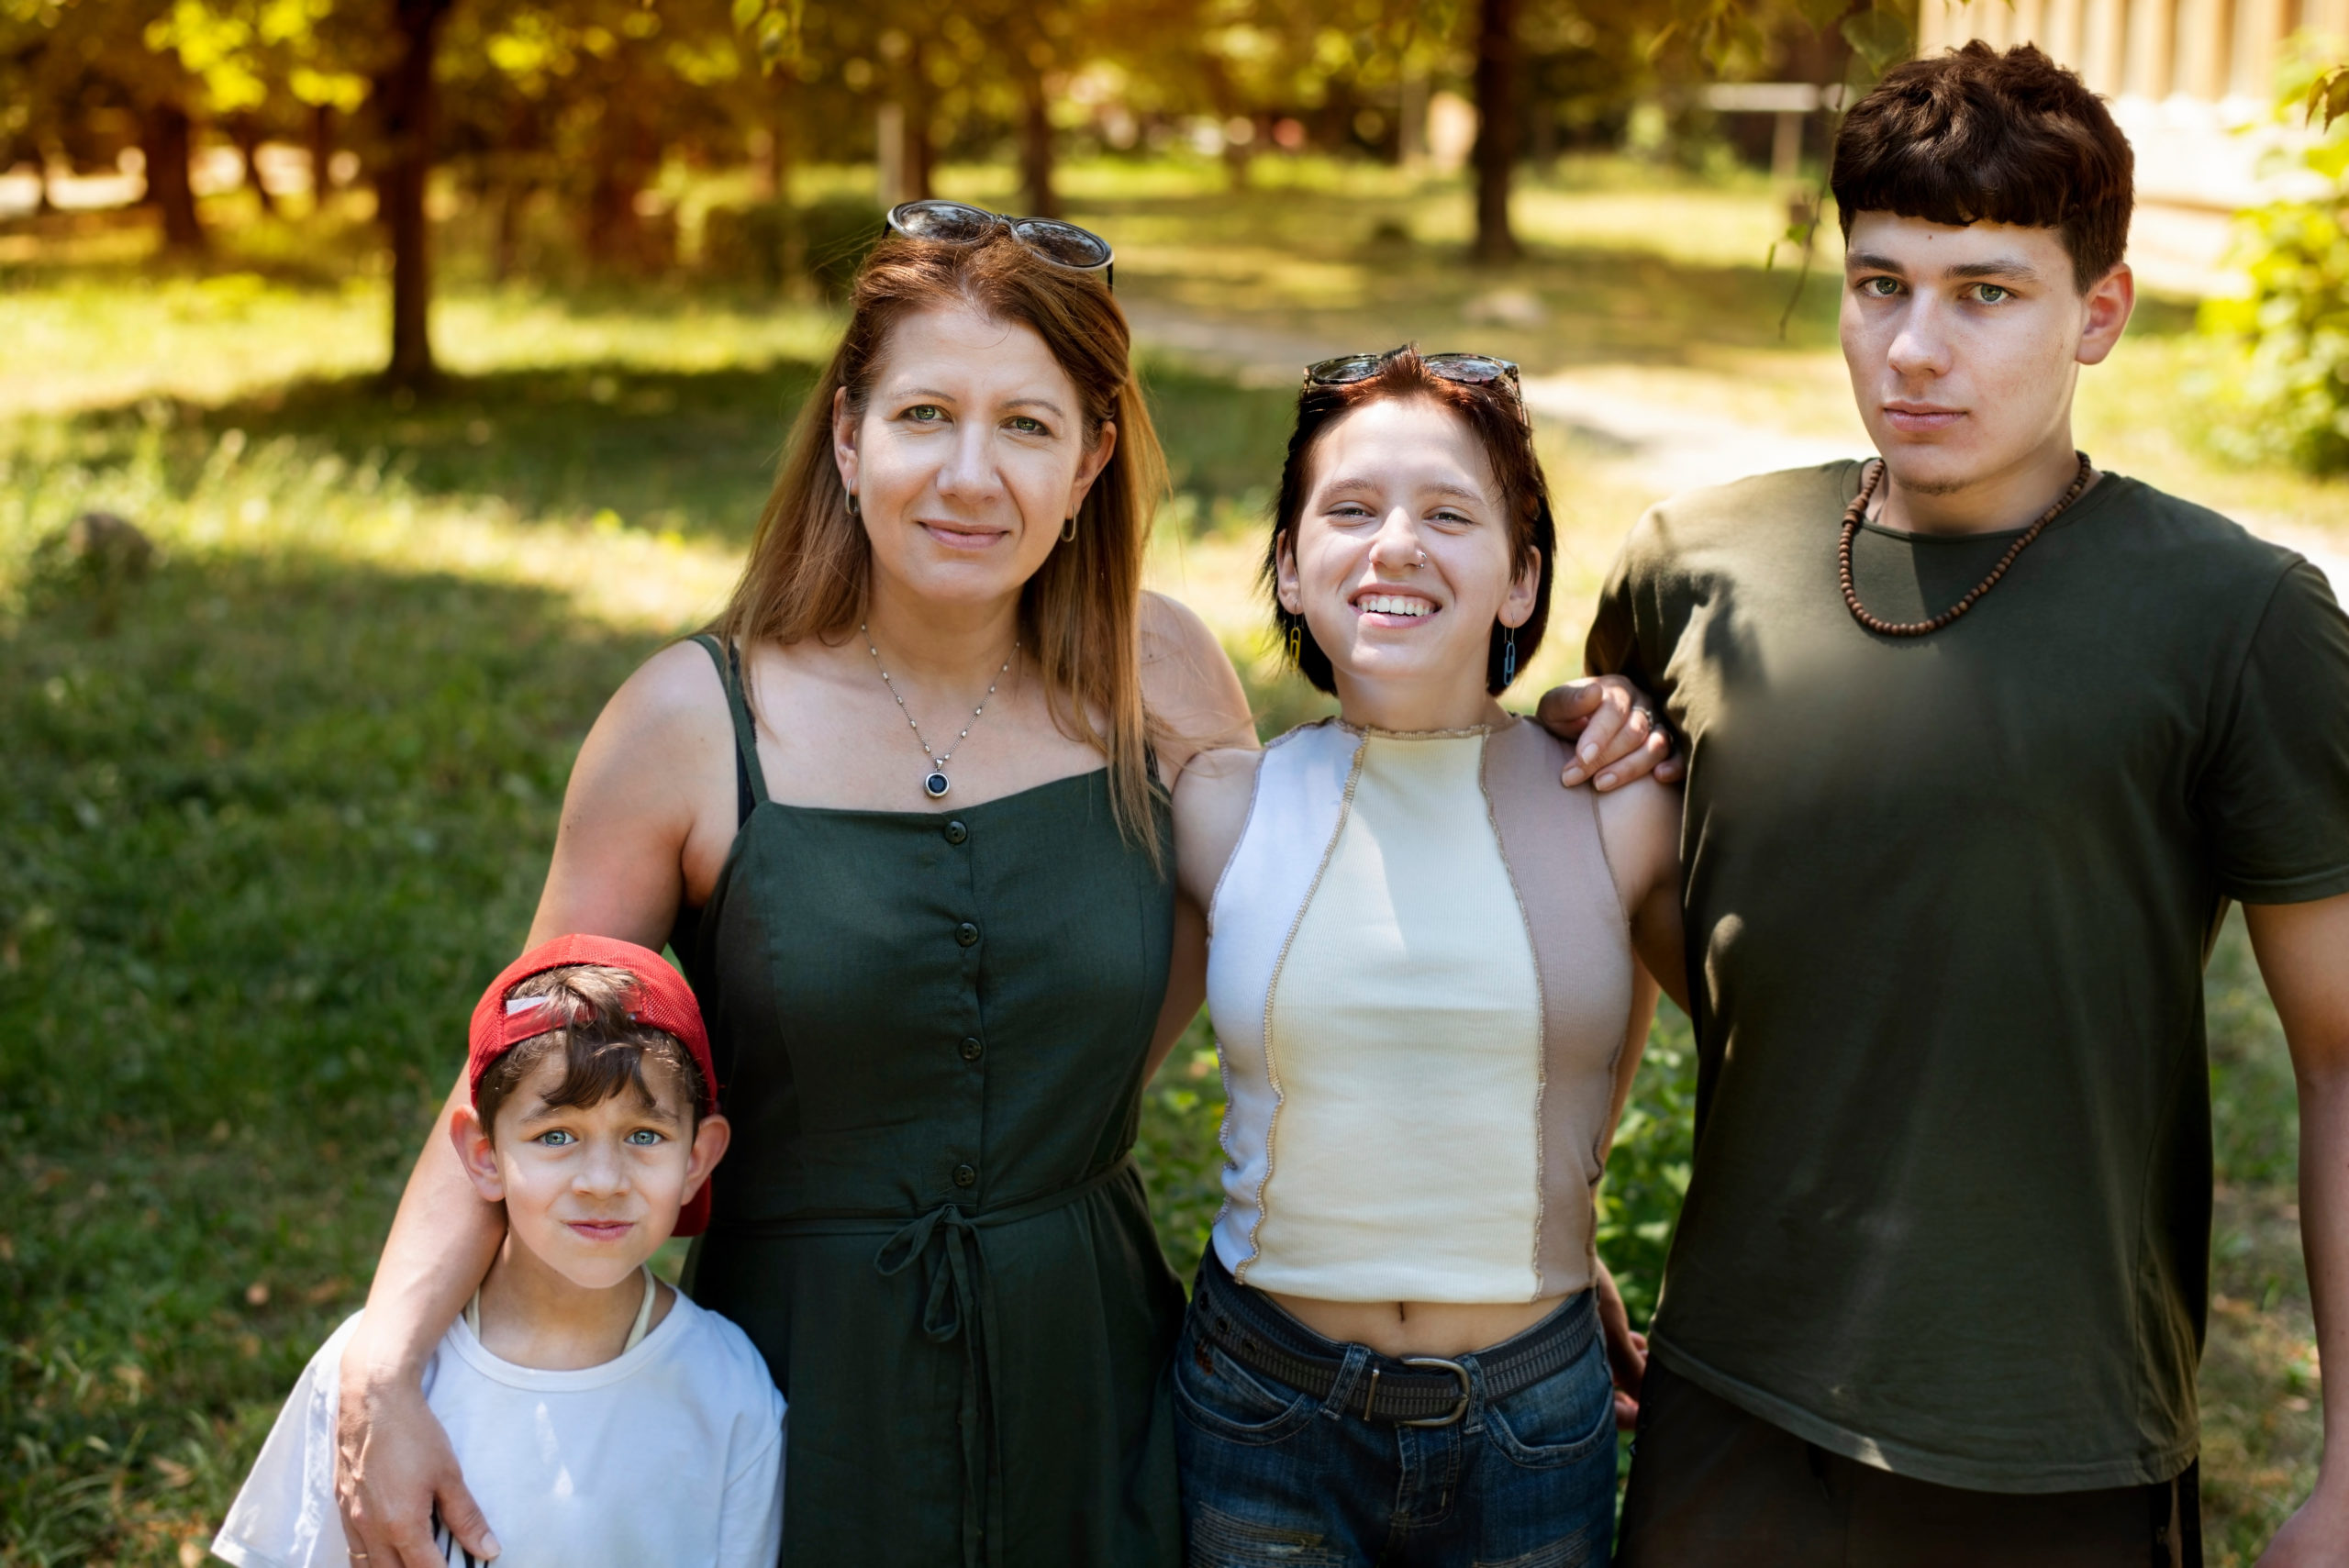 A family of four, including a mother and three children of varying ages, stands closely together in a sunny park, smiling at the camera. the mother and her two teenagers appear, while the youngest child wears a red cap.